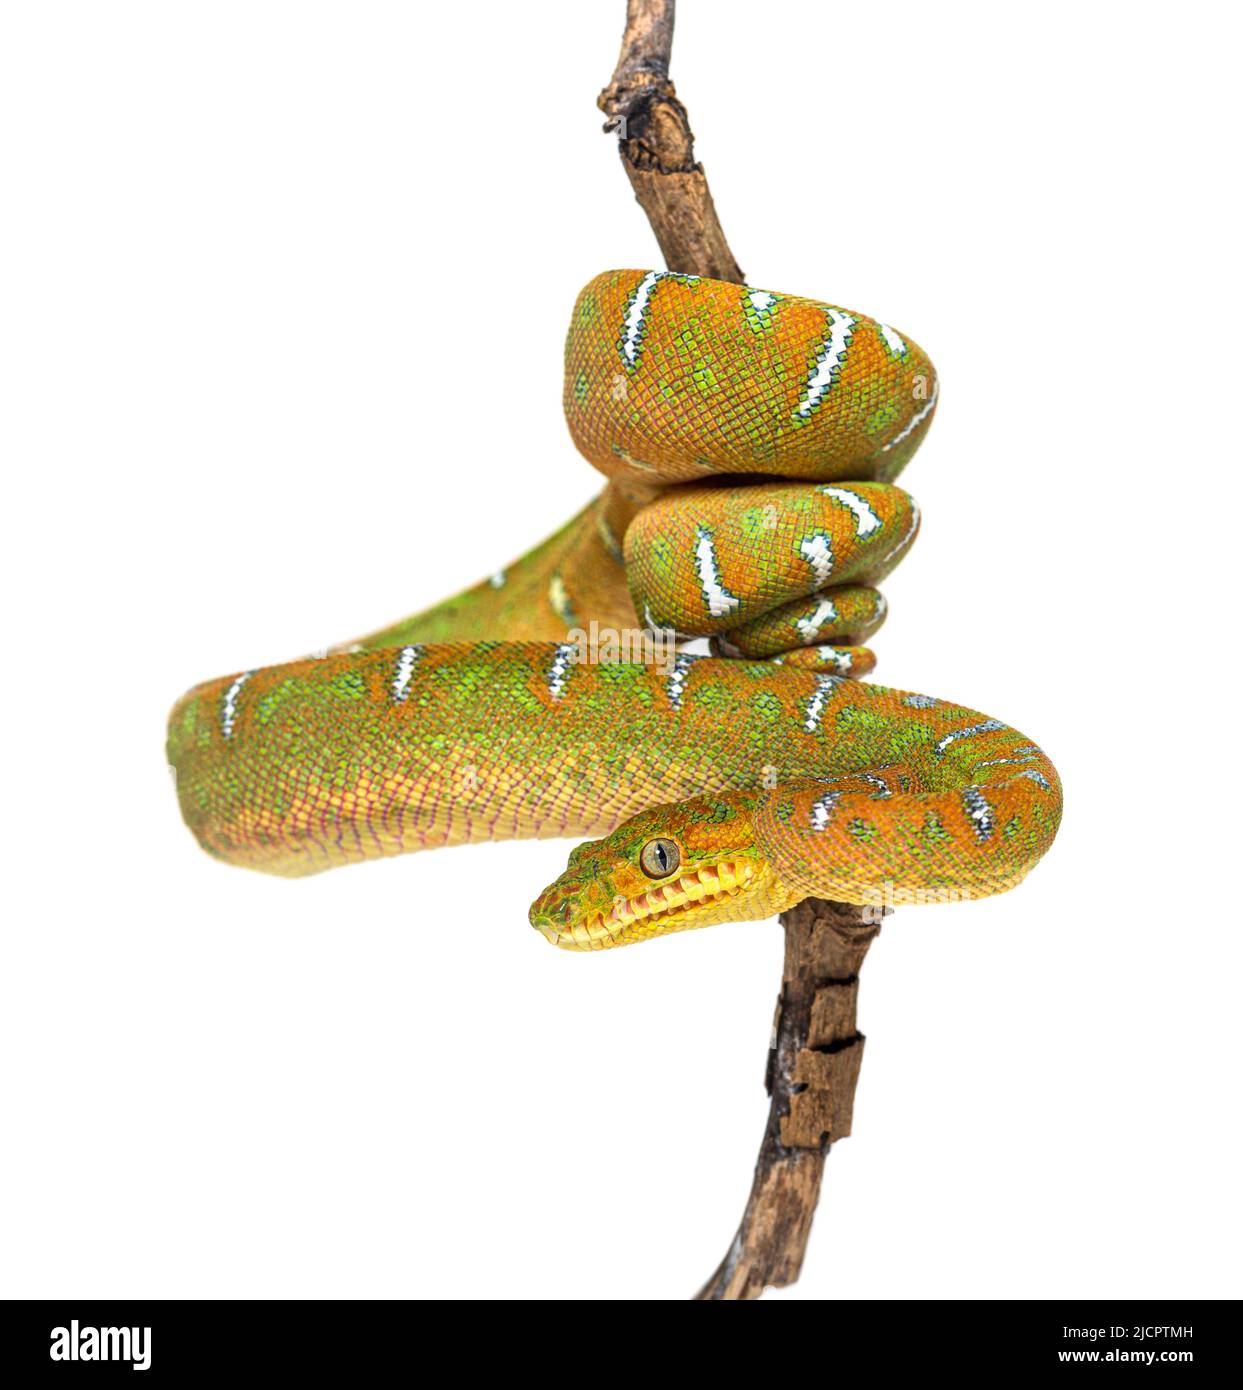 Juvenile Emerald tree boa, hanging and wrapped around a branch Stock Photo